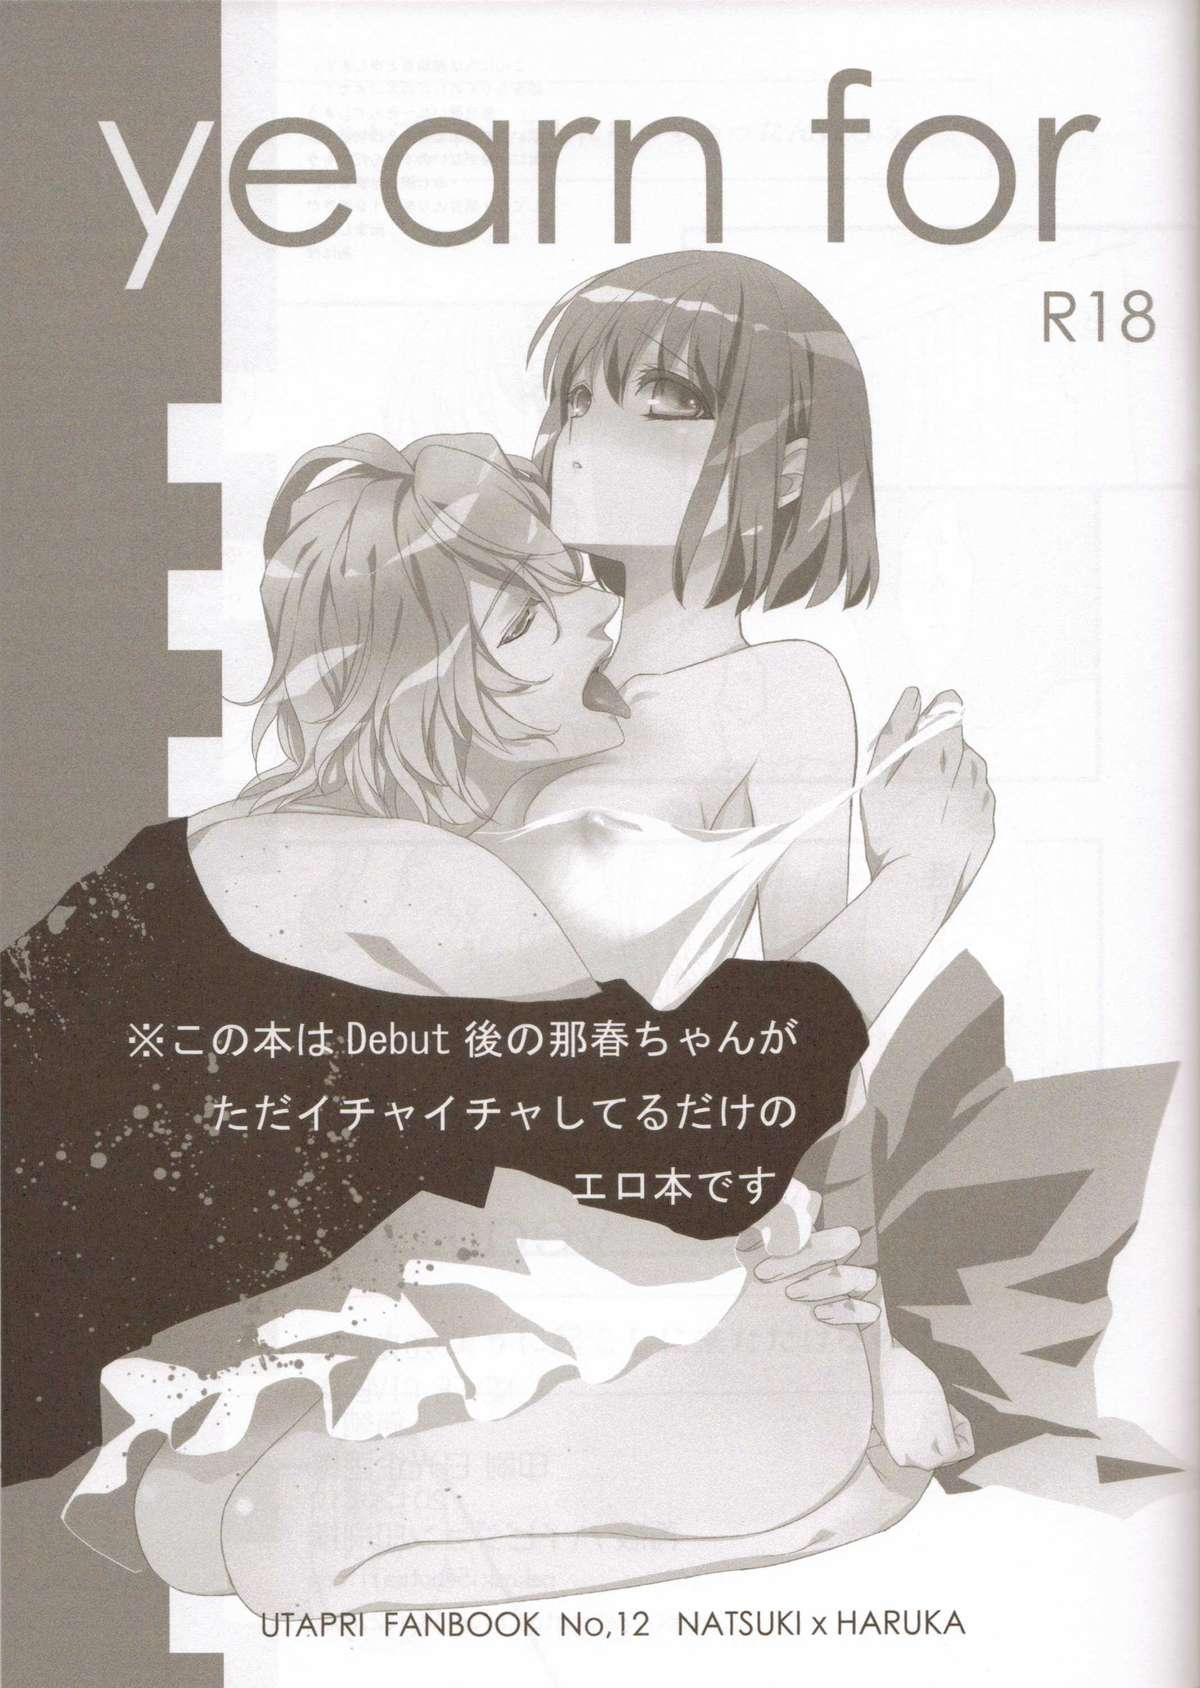 Pussy To Mouth yearn for - Uta no prince-sama Baile - Page 2